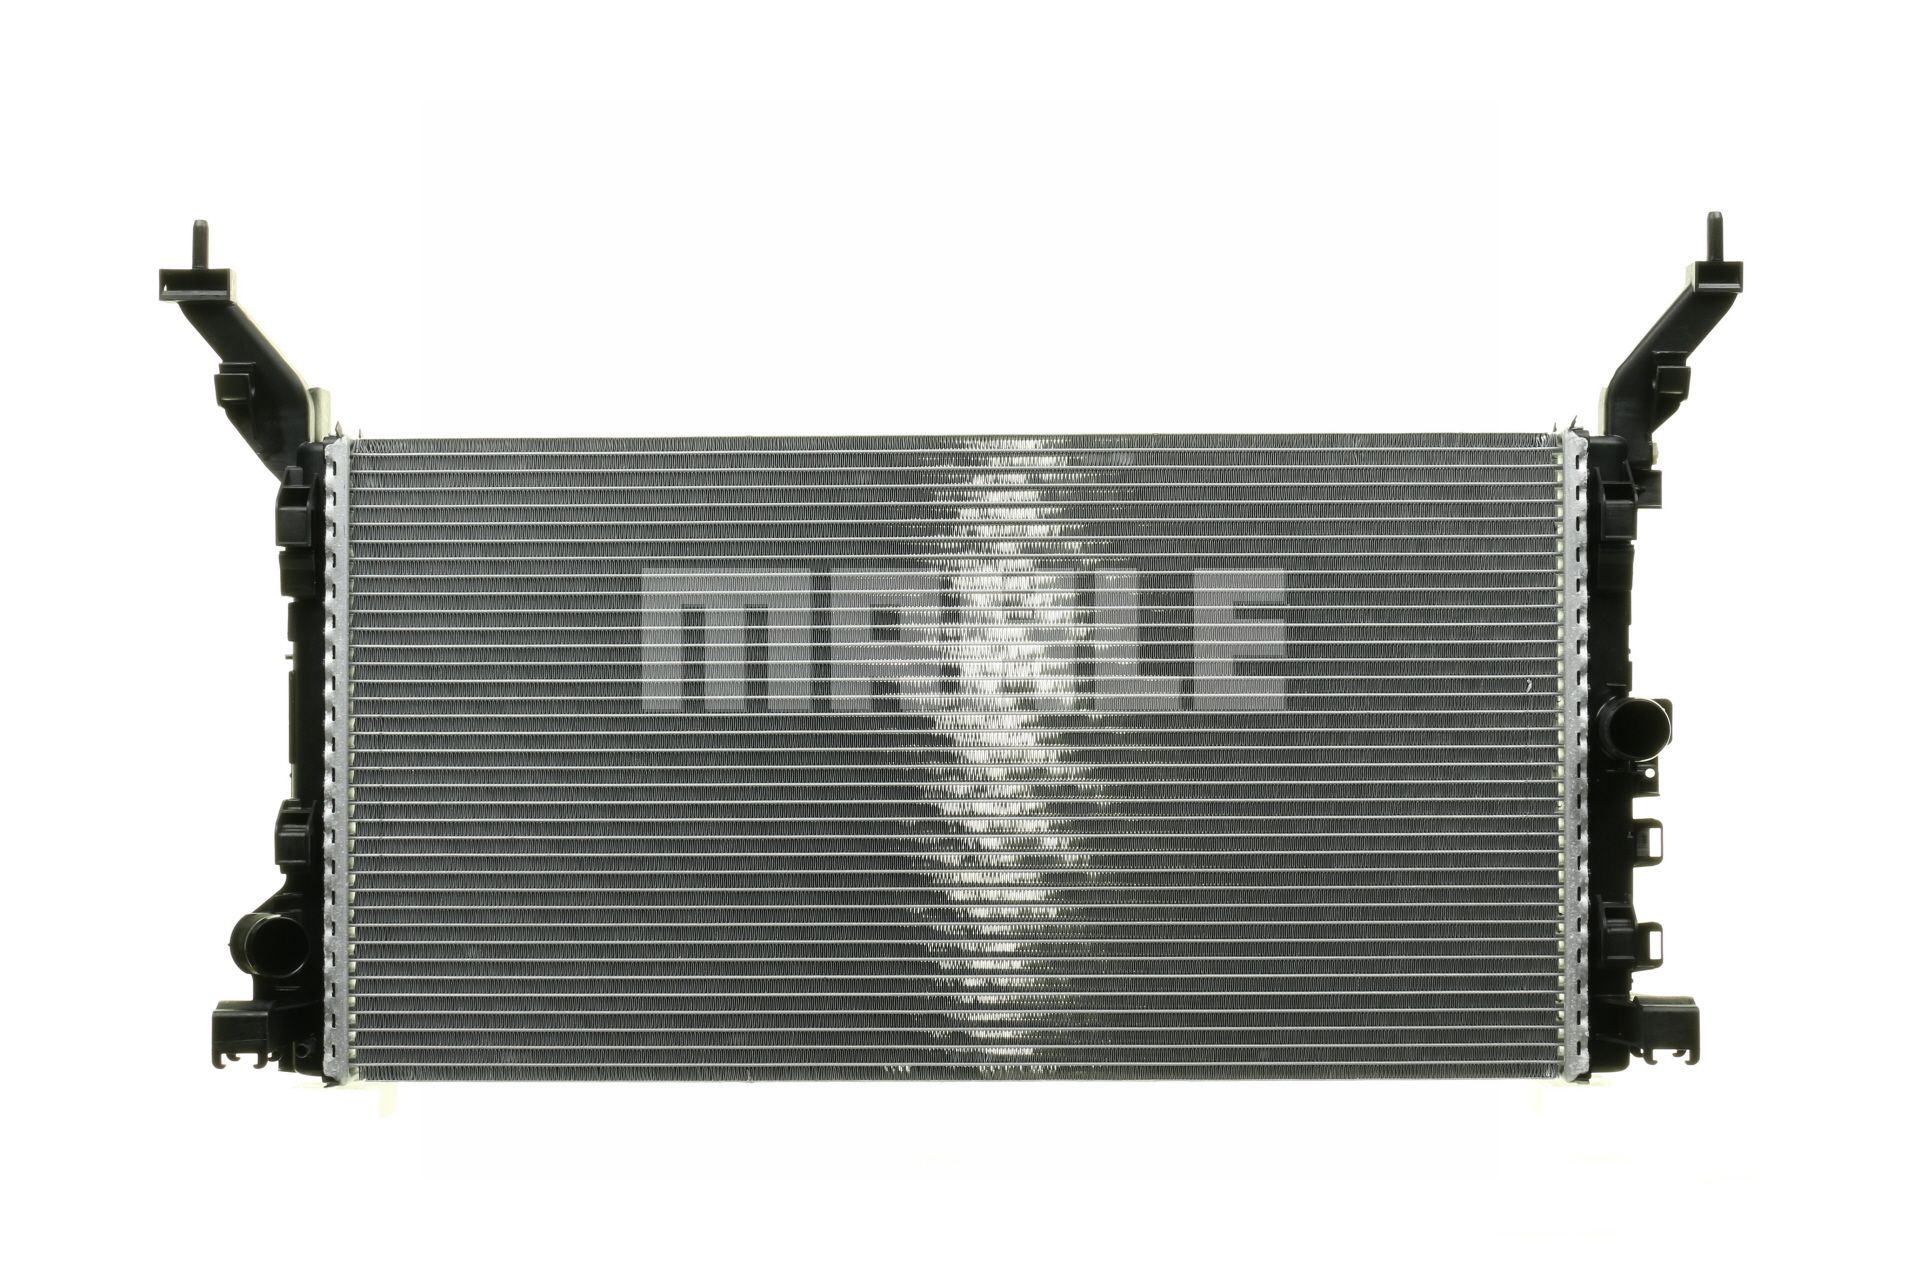 MAHLE ORIGINAL CR 896 000P Engine radiator for vehicles with/without air conditioning, 690 x 368 x 40 mm, Automatic Transmission, Brazed cooling fins